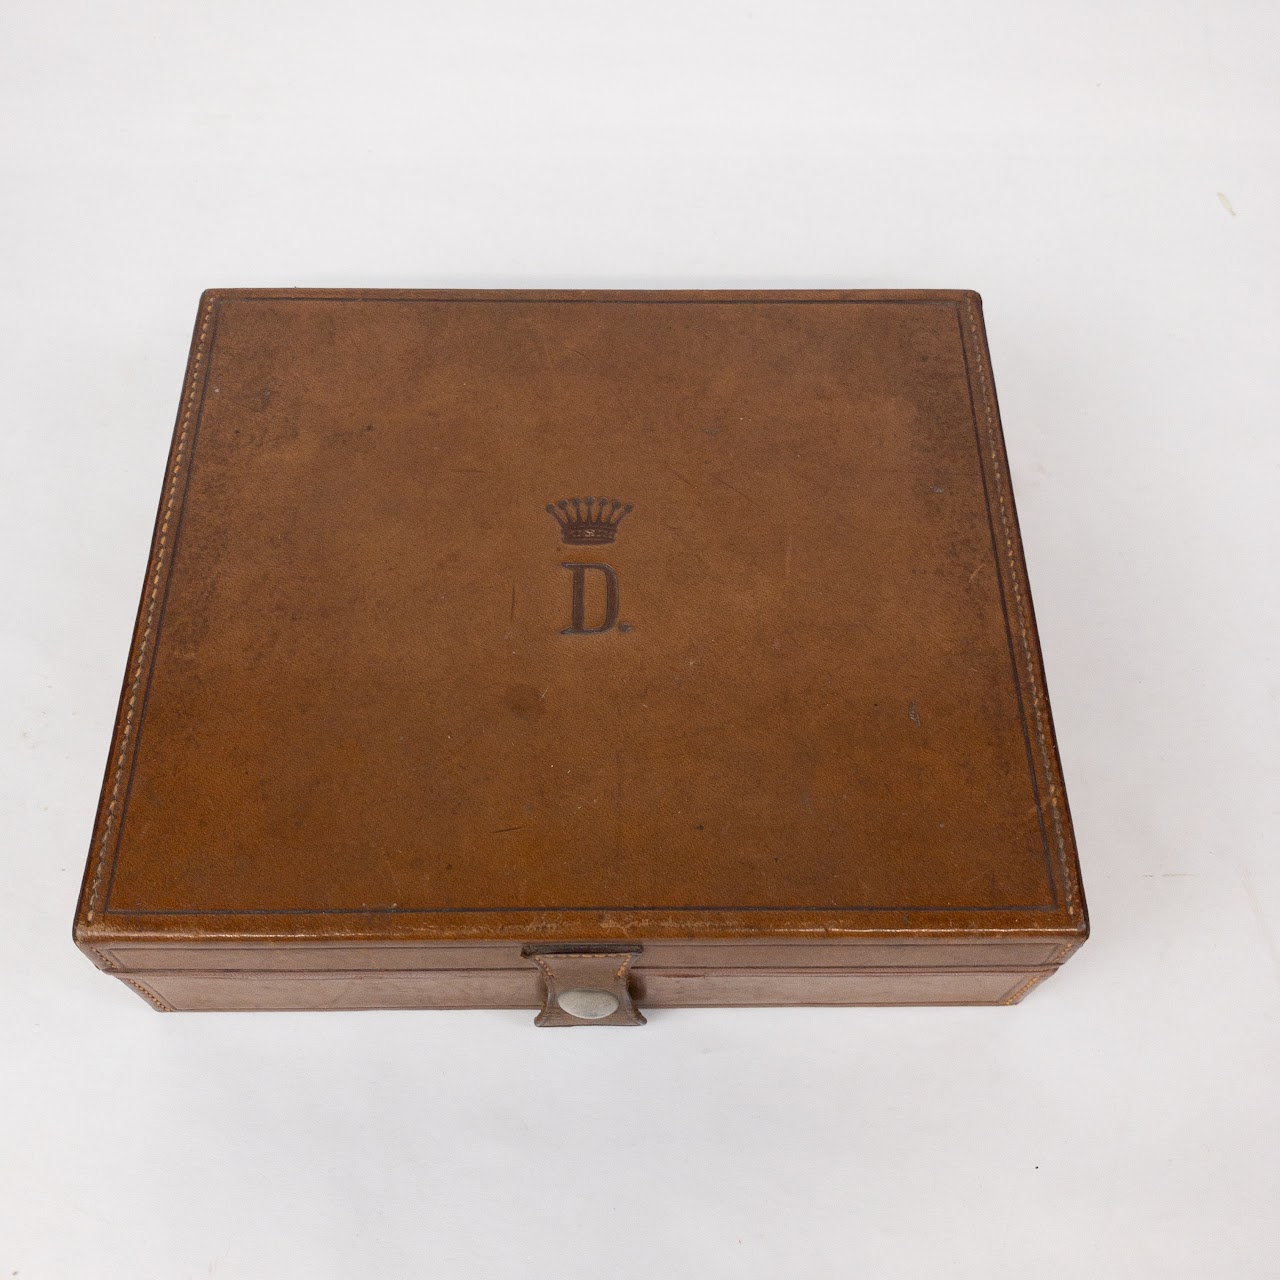 Vintage Leather Box with Handkerchiefs